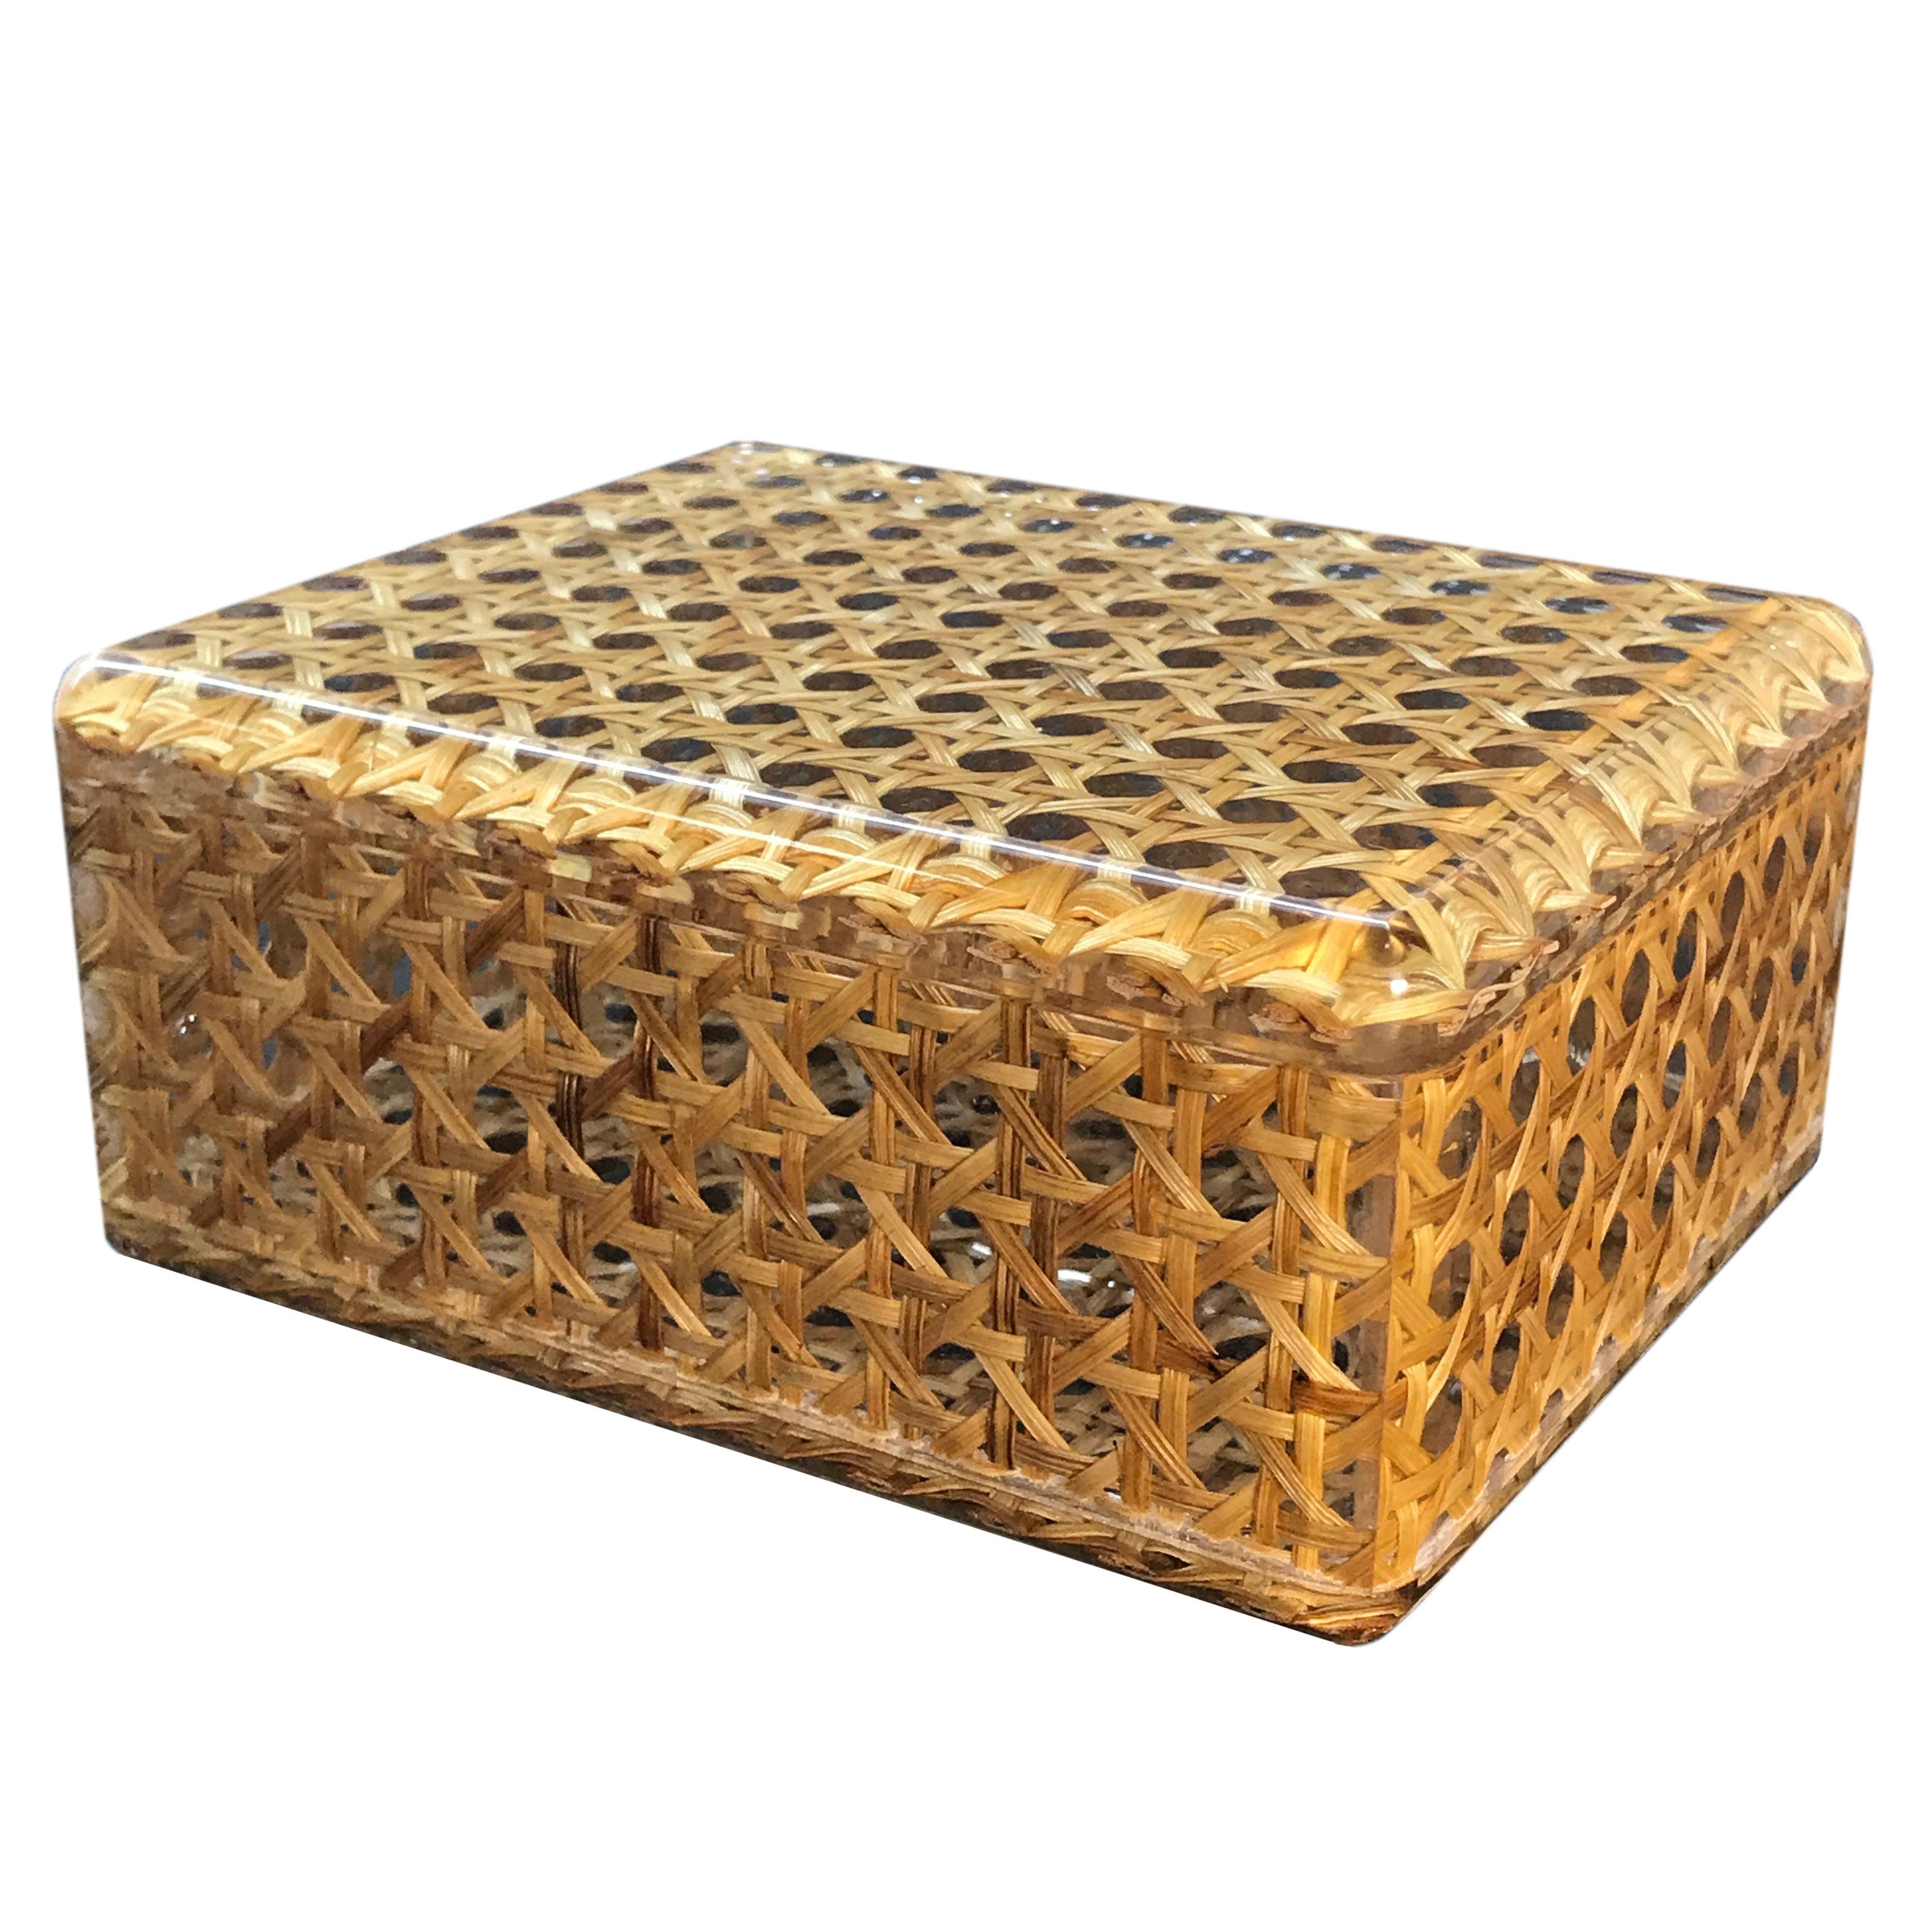 Midcentury Lucite and Vienna Straw Wicker Italian Box 1970s Christian Dior Style